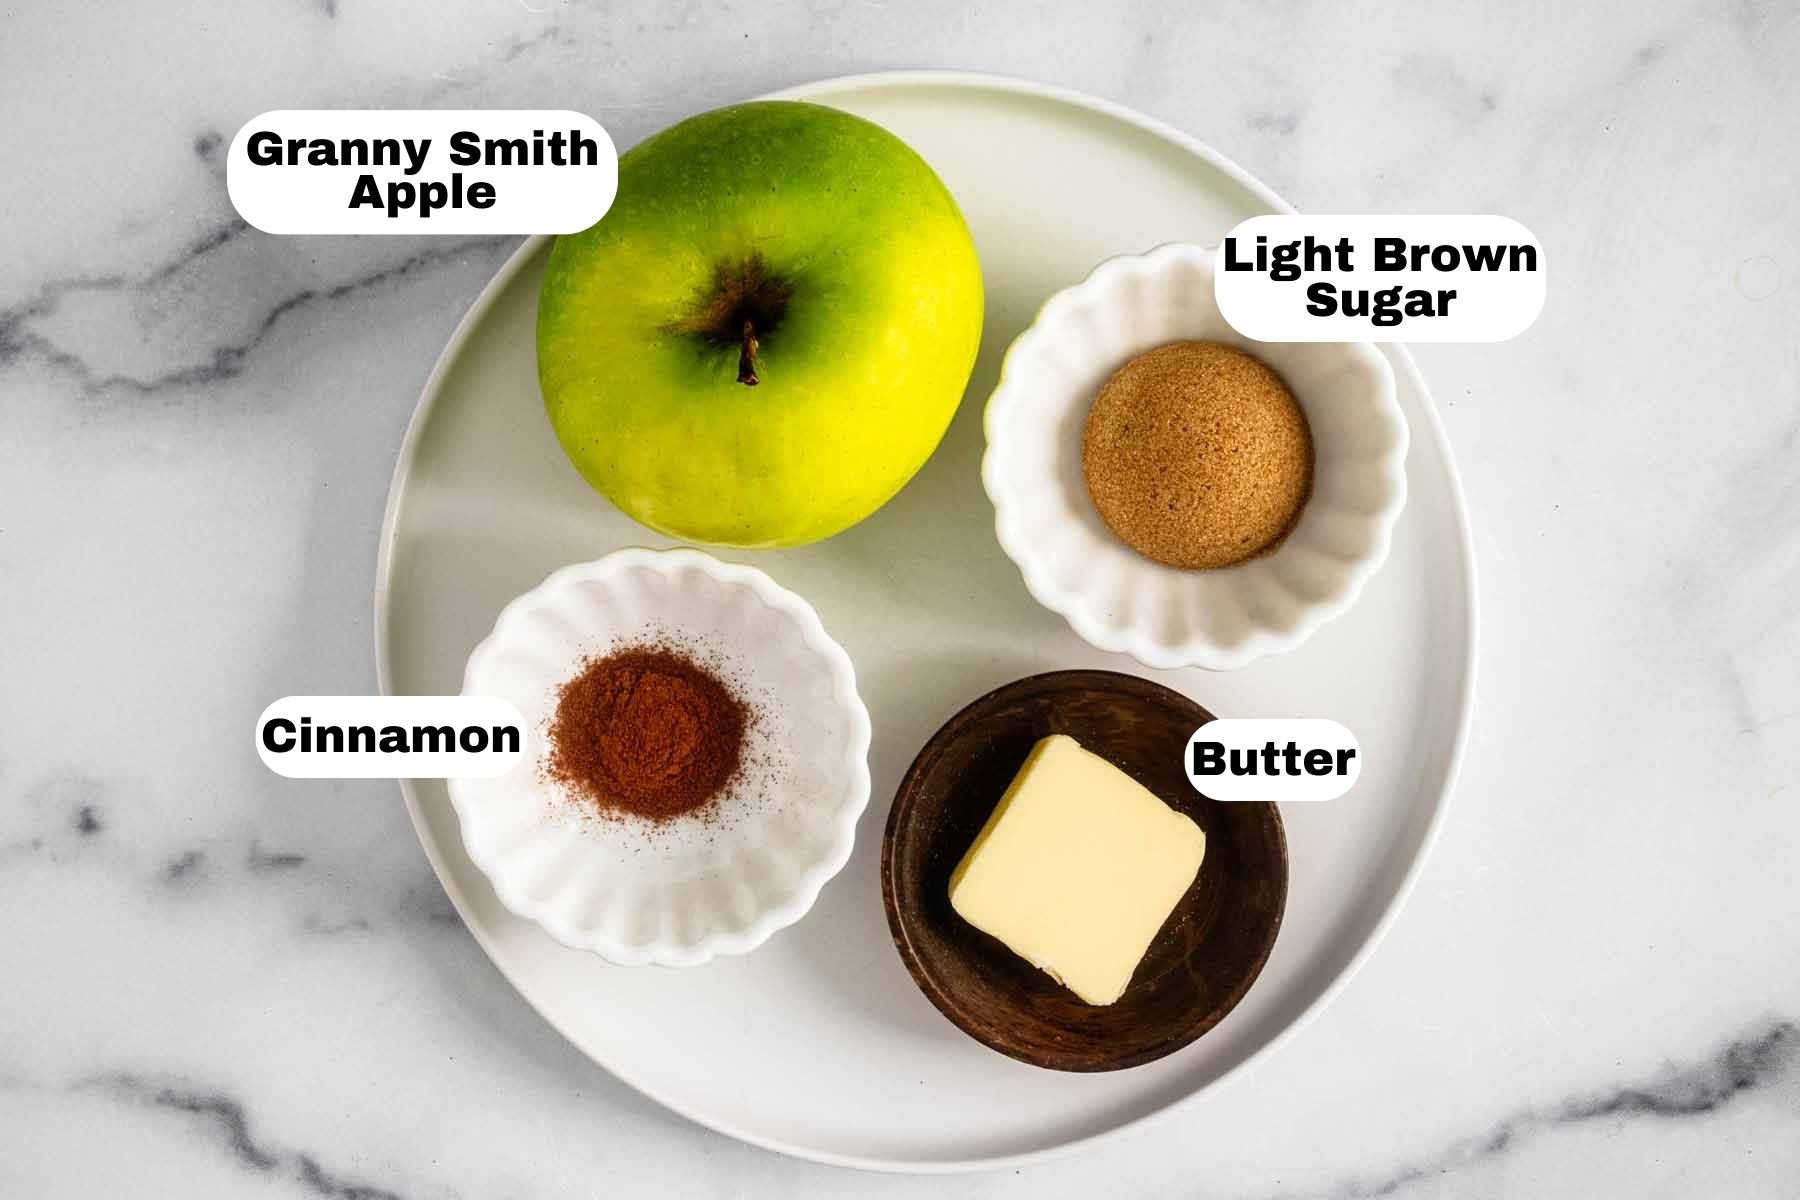 Apple topping ingredients: Granny Smith apple, light brown sugar, cinnamon, butter.